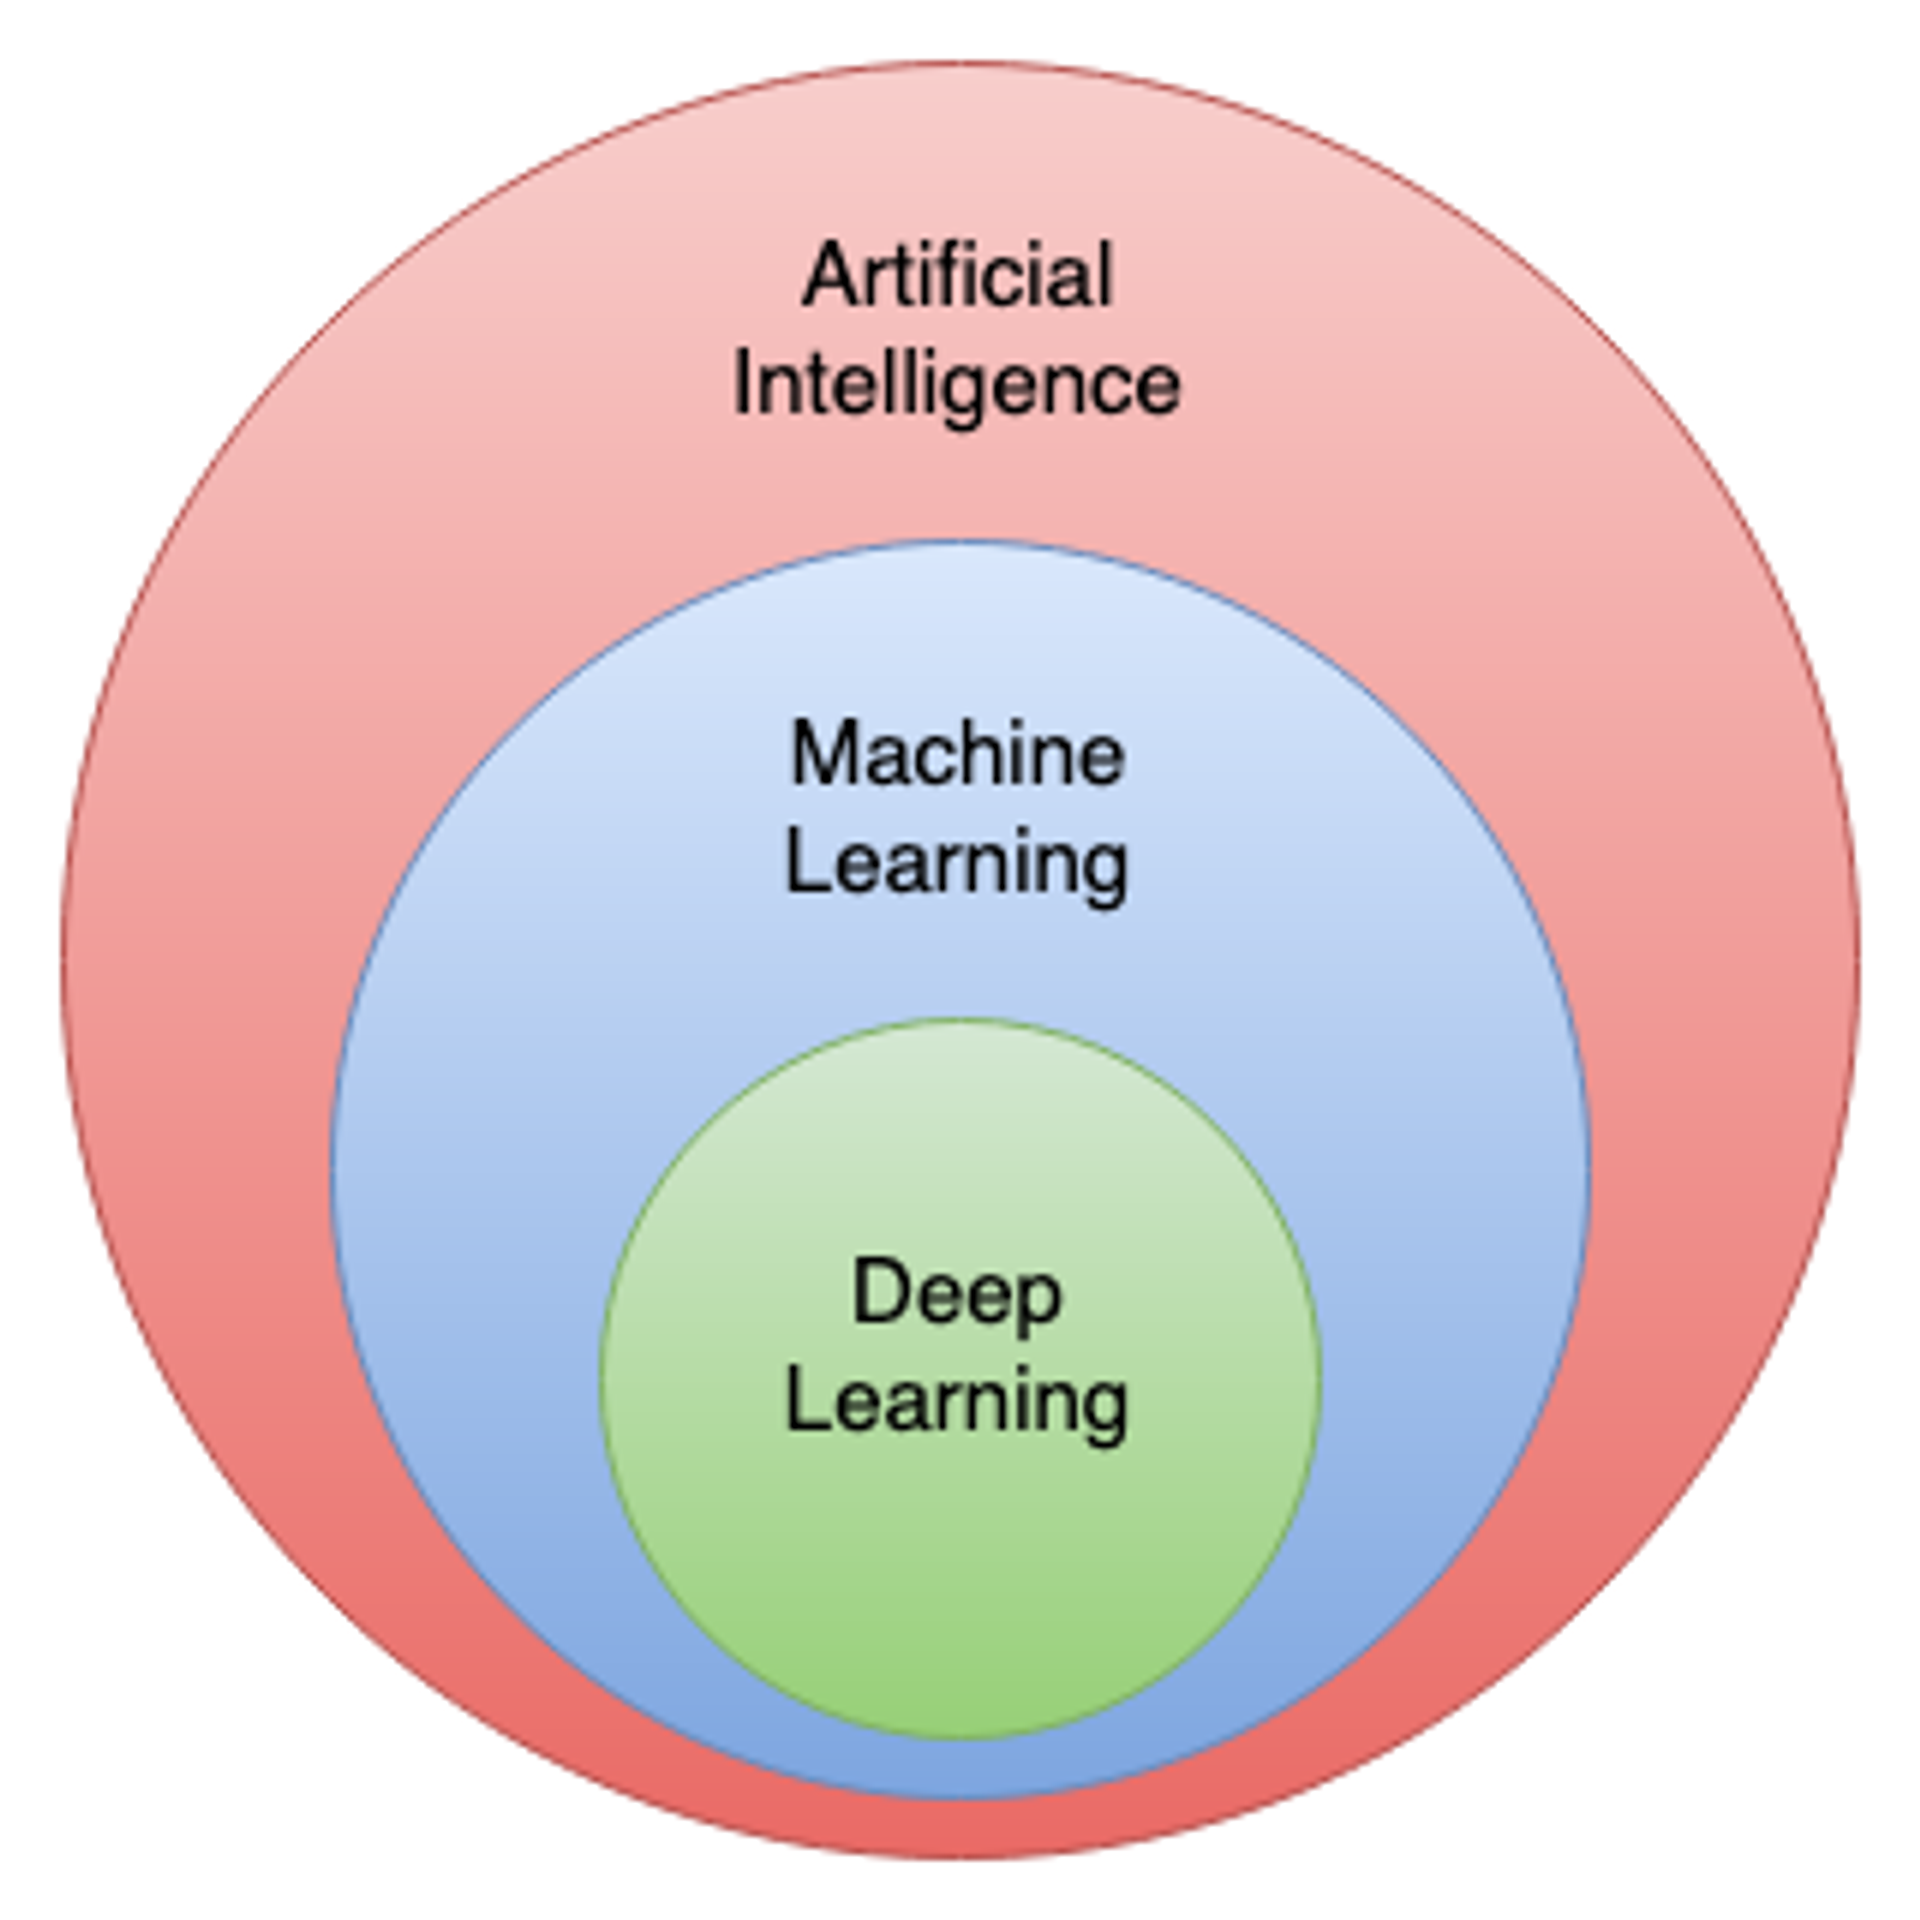 How machine learning and deep learning fit into the larger sphere of artificial intelligence